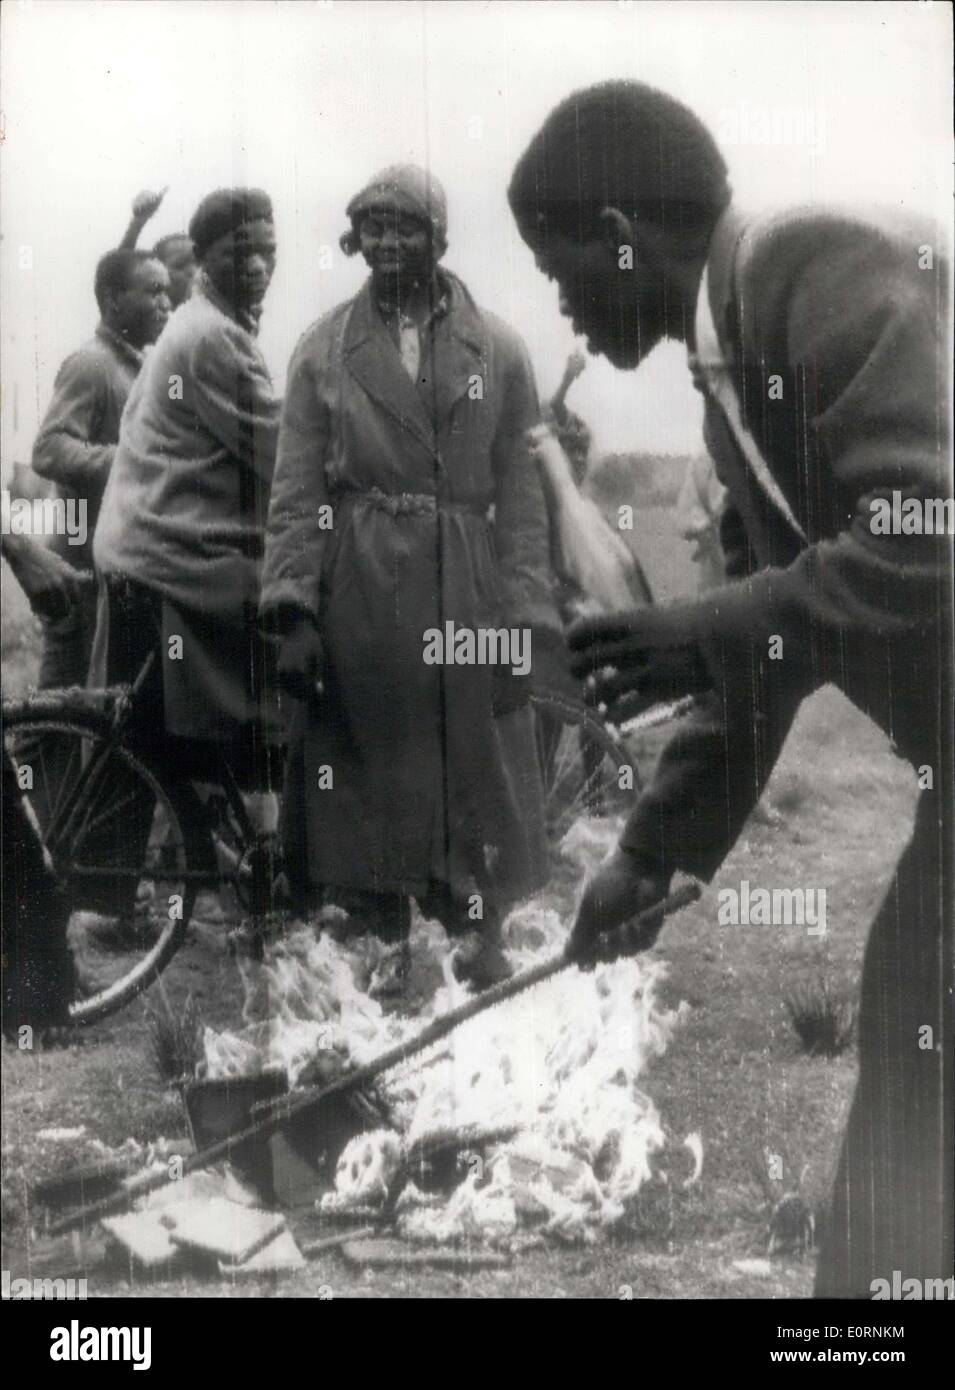 Mar. 28, 1960 - Natives Burn Their Pass Books.: Africans today made a bonfire of their pass books as they marked a day of mourning for the 71 victims of last Monday's police shootings. The burning from the recent announcement of the suspension of the ''Pass'' Law. Photo shows The scene as native burned their pass-books in Orlando today - after the recent auspension of the ''Pass'' Law. Stock Photo